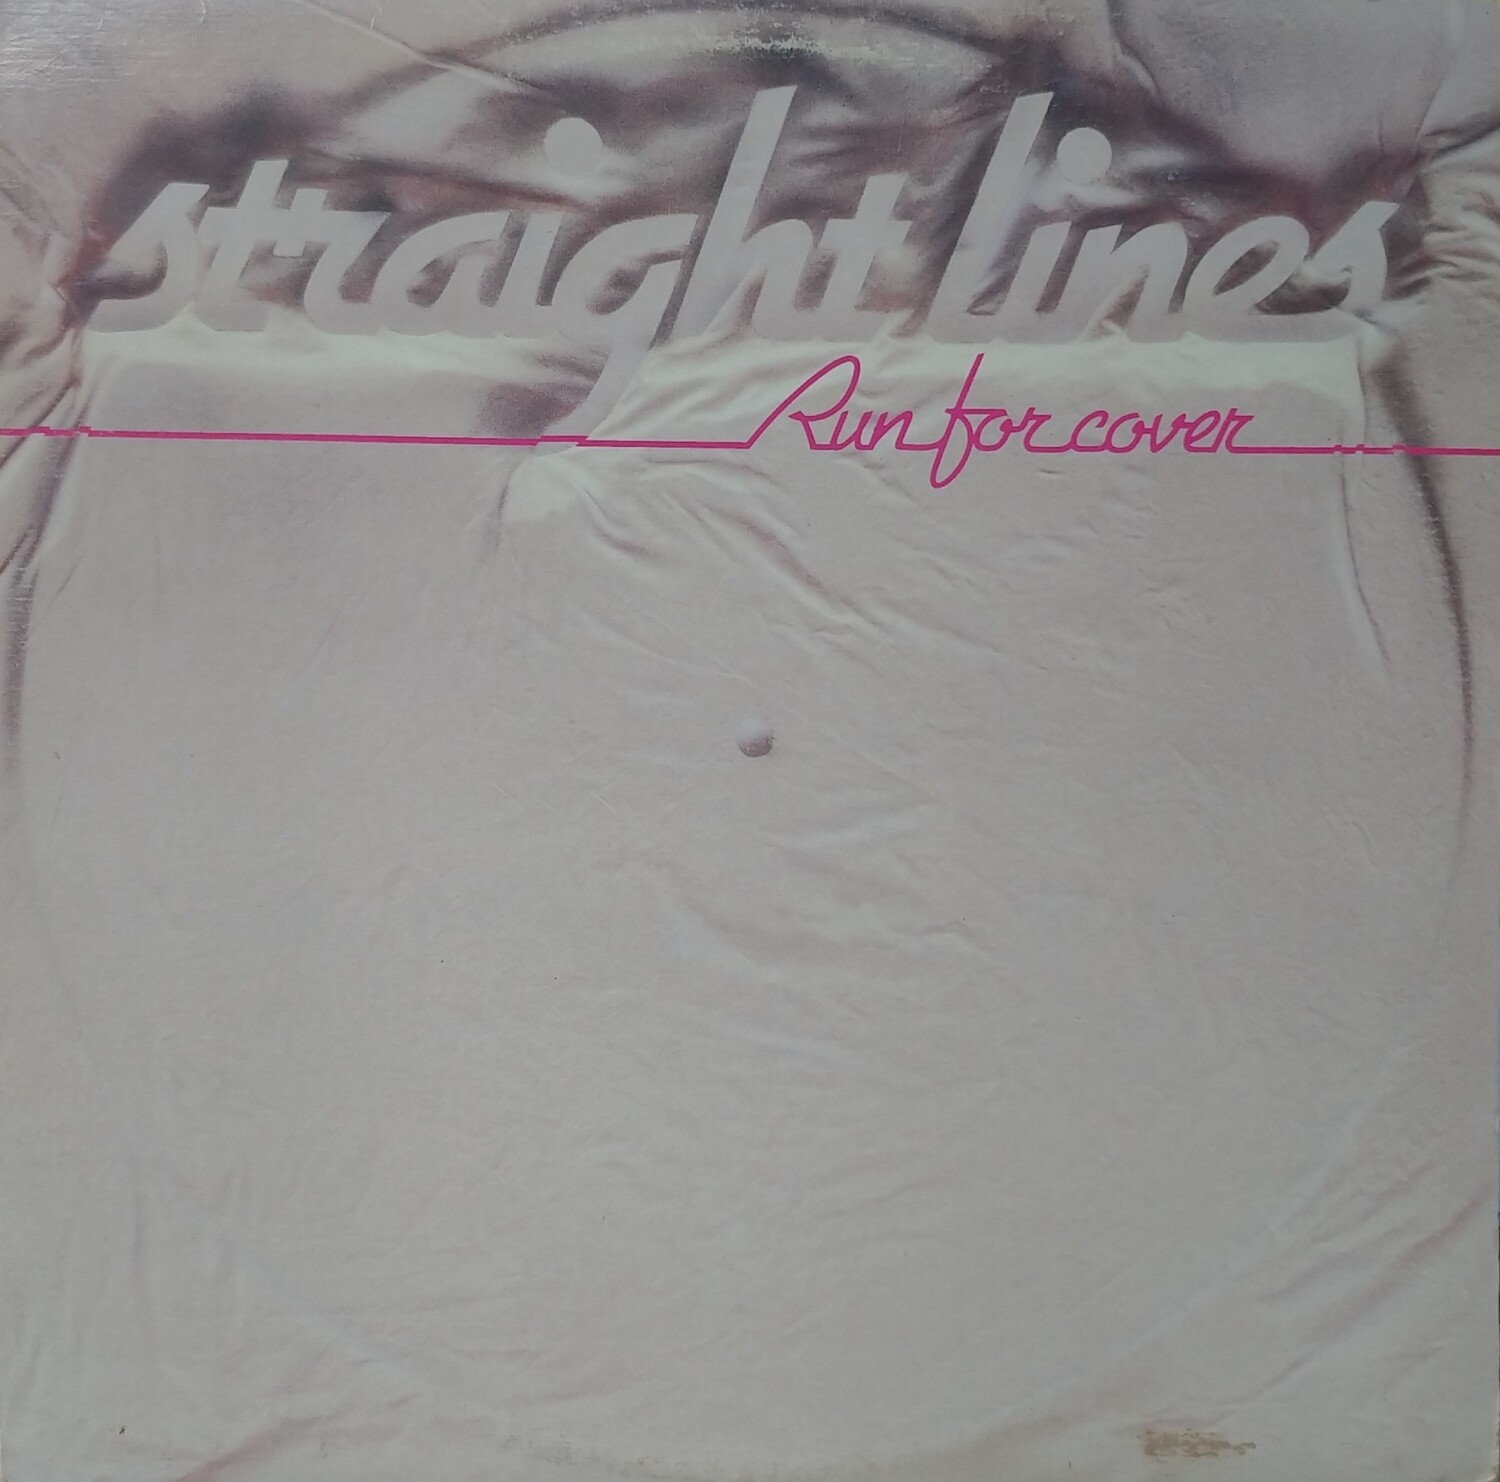 Straight Lines - Run for cover